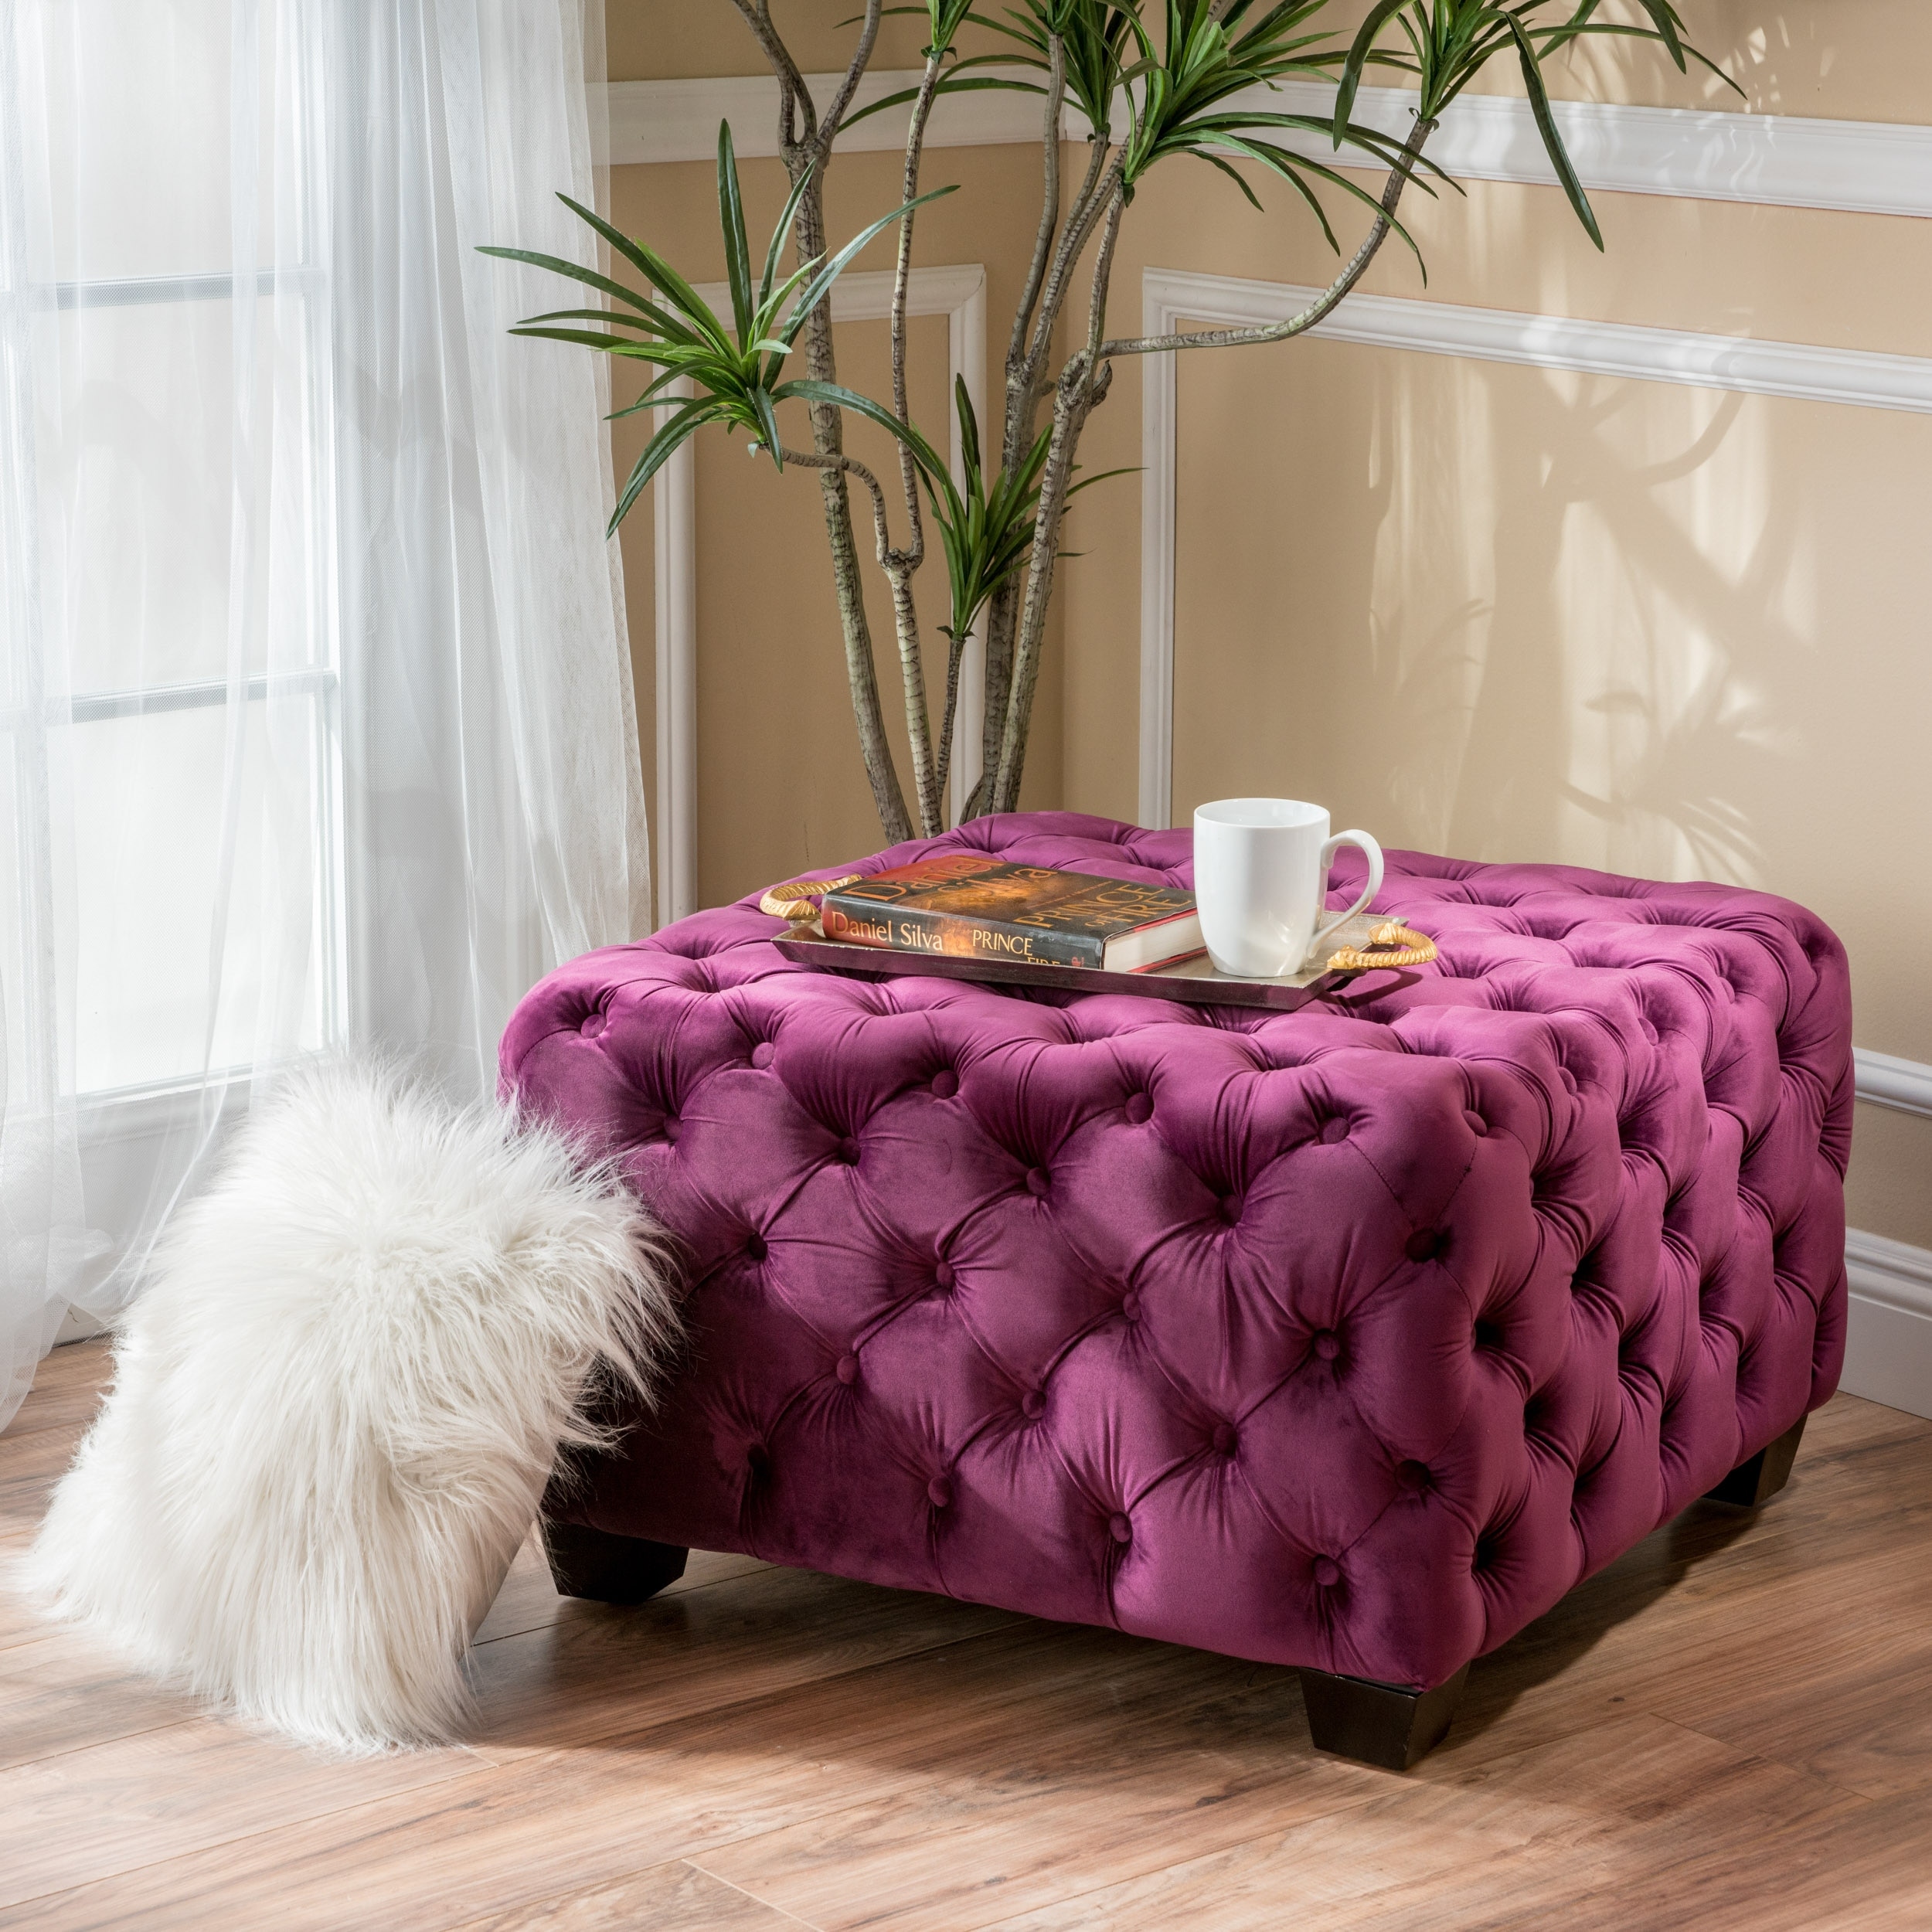 https://ak1.ostkcdn.com/images/products/is/images/direct/b948cdb7562b37f338a51e71b383a6cd24753a4e/Jaymee-Modern-Glam-Button-Tufted-Velvet-Ottoman-by-Christopher-Knight-Home.jpg